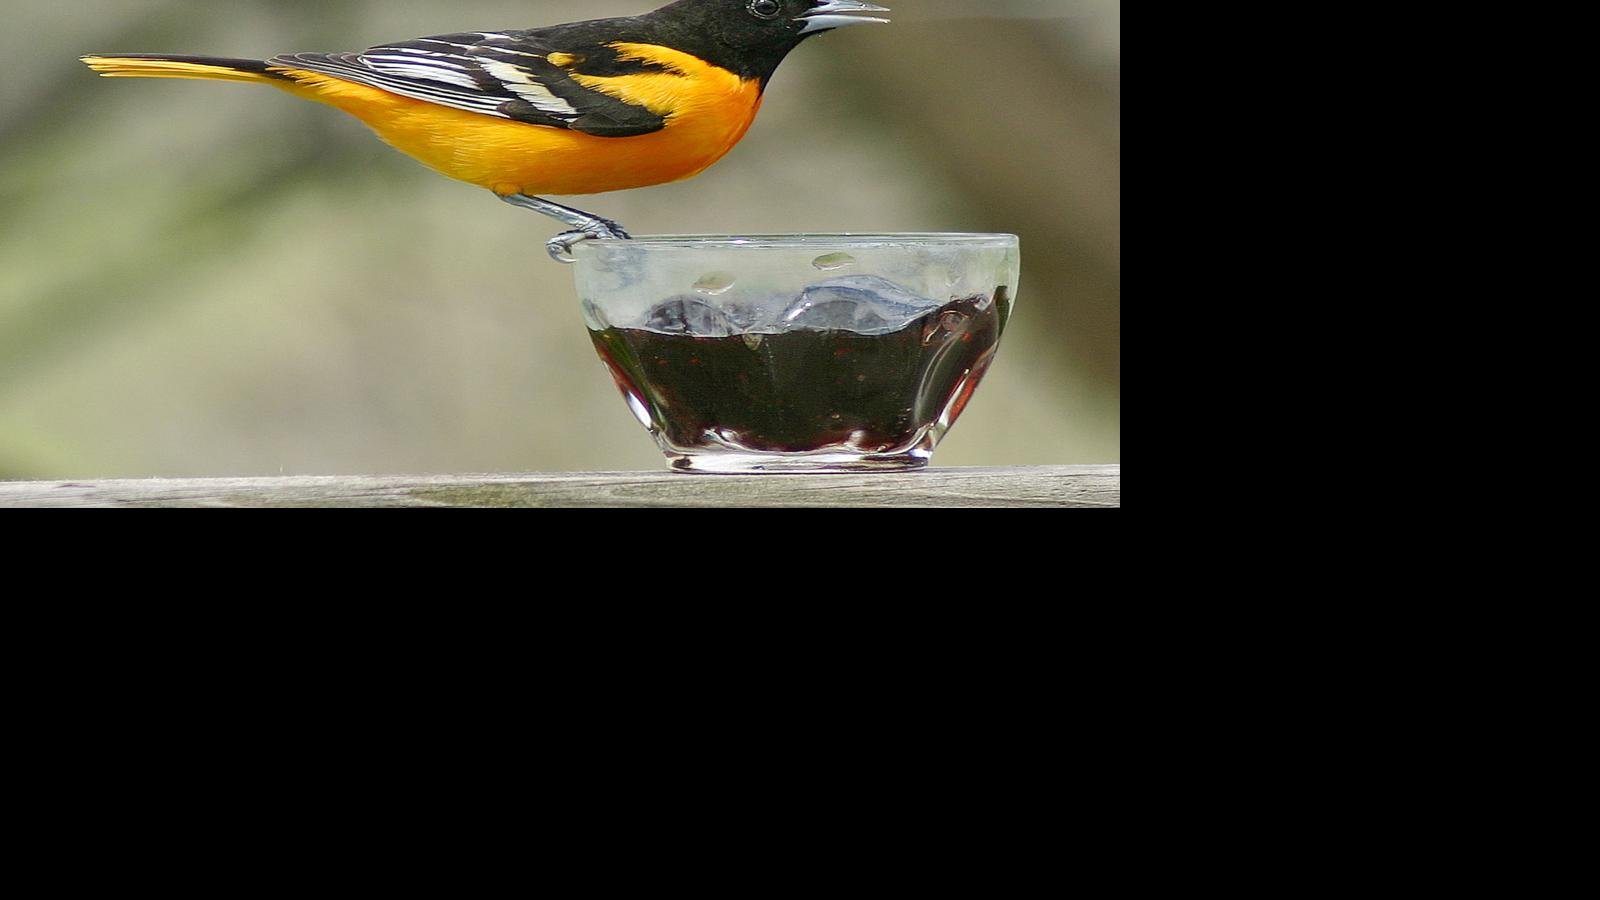 Baltimore oriole sighting offers exciting birding moment Lifestyles